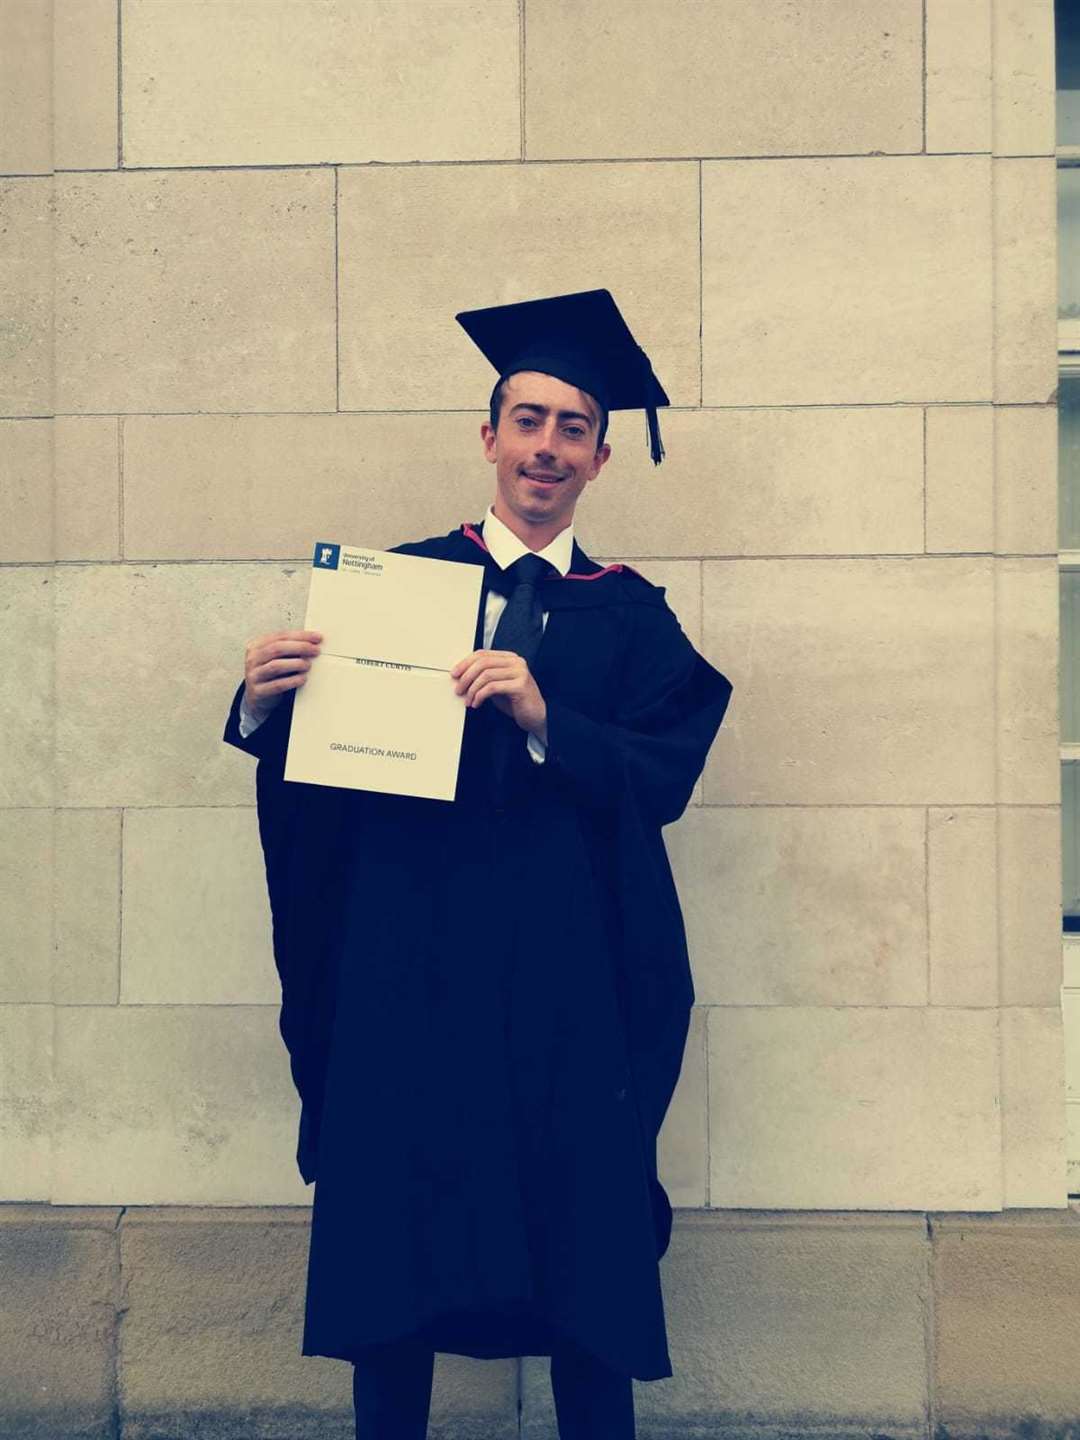 Robbie graduated from the University of Nottingham with a first-class degree